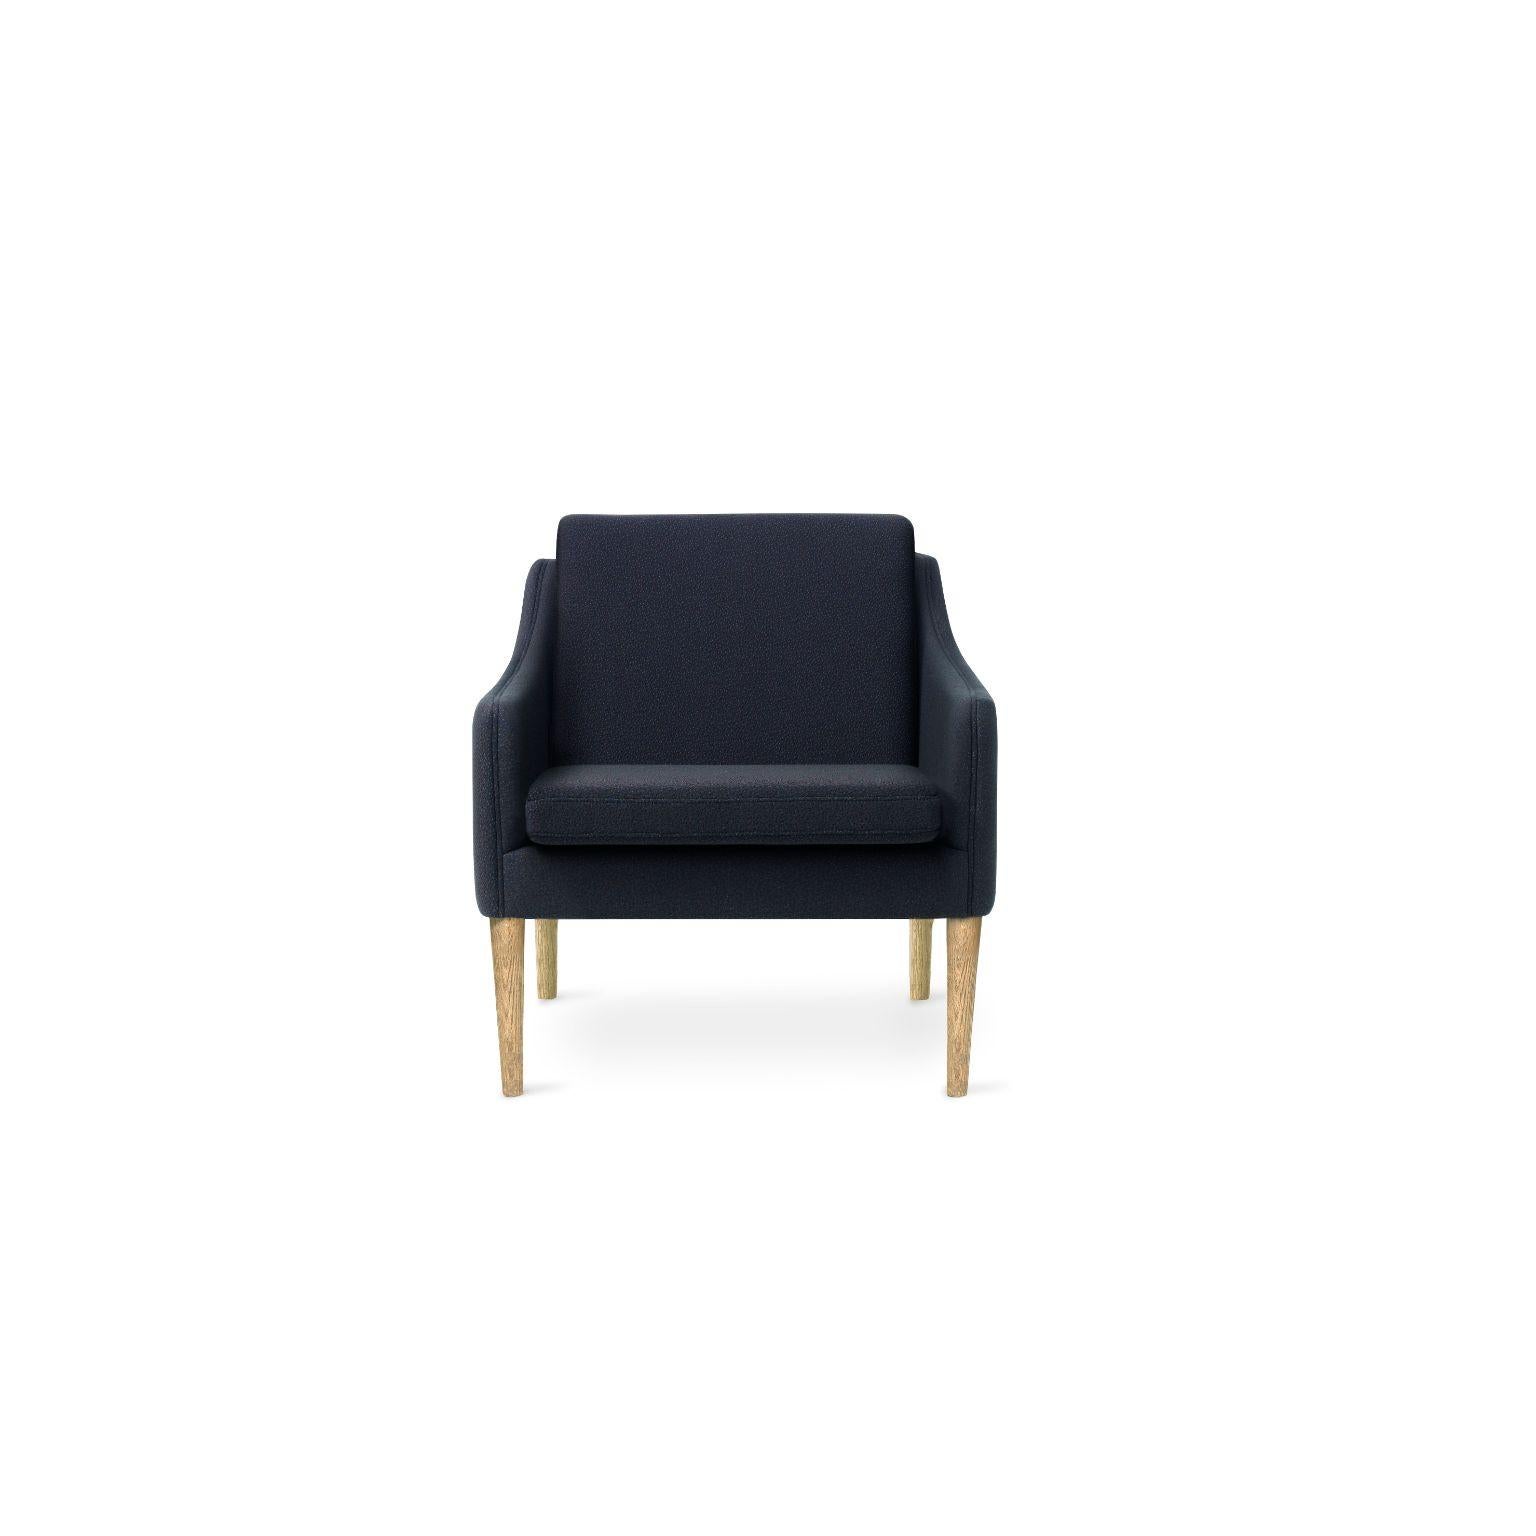 Mr. Olsen lounge chair sprinkles solid smoked oak midnight blue by Warm Nordic
Dimensions: D 81 x W 79 x H 78 cm
Material: Textile upholstery, foam, spring system, oak
Weight: 27 kg
Also available in different colours, materials and